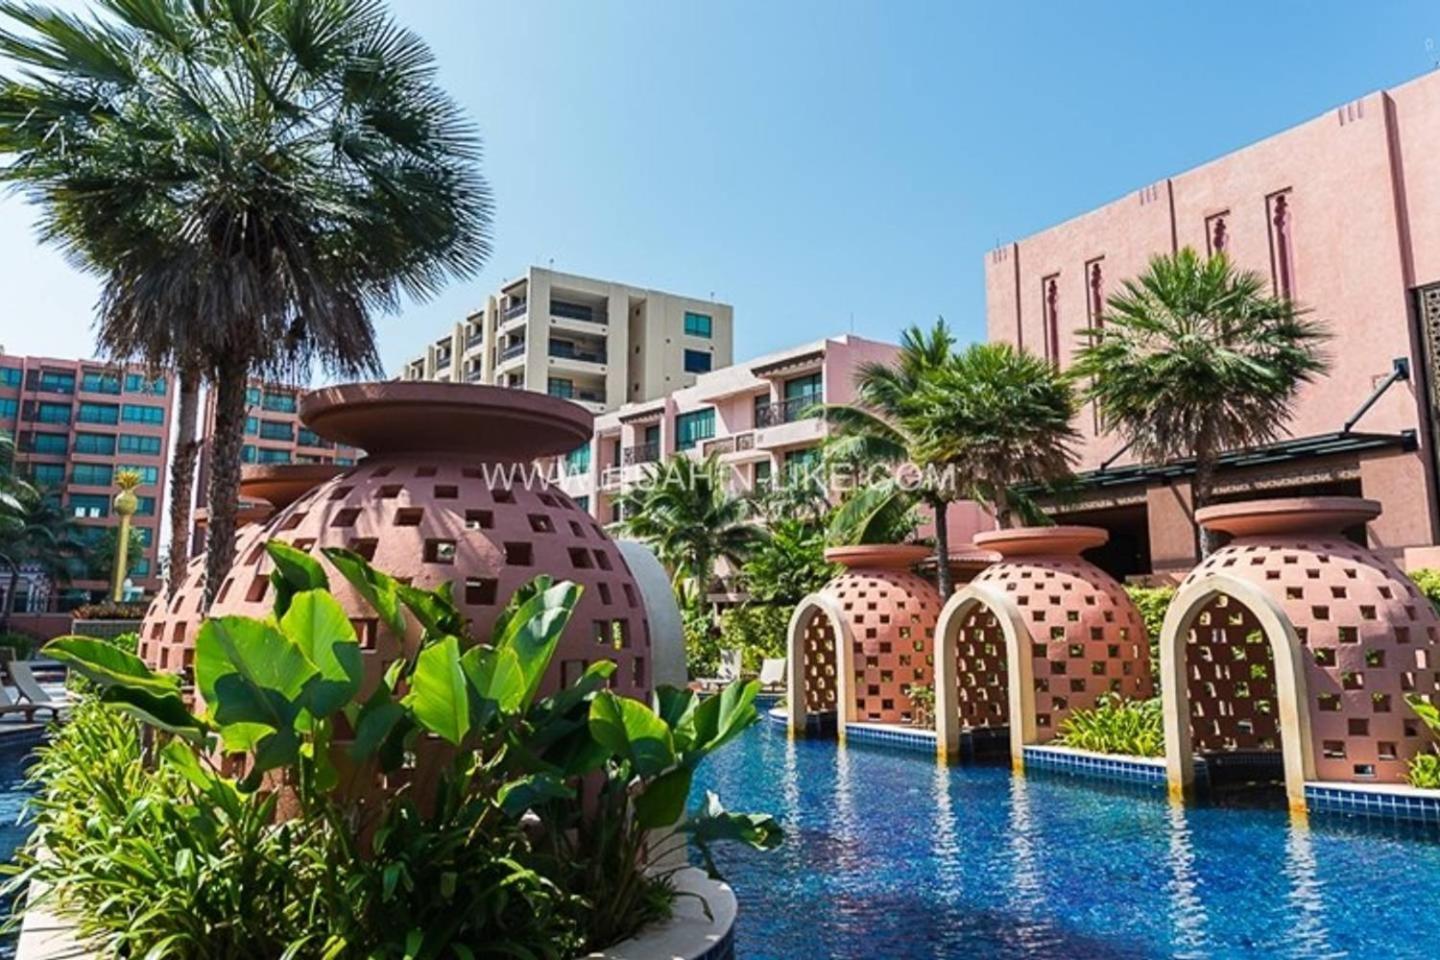 Marrakesh Huahin 4Bedrooms Suite With Jacuzzi 208 外观 照片